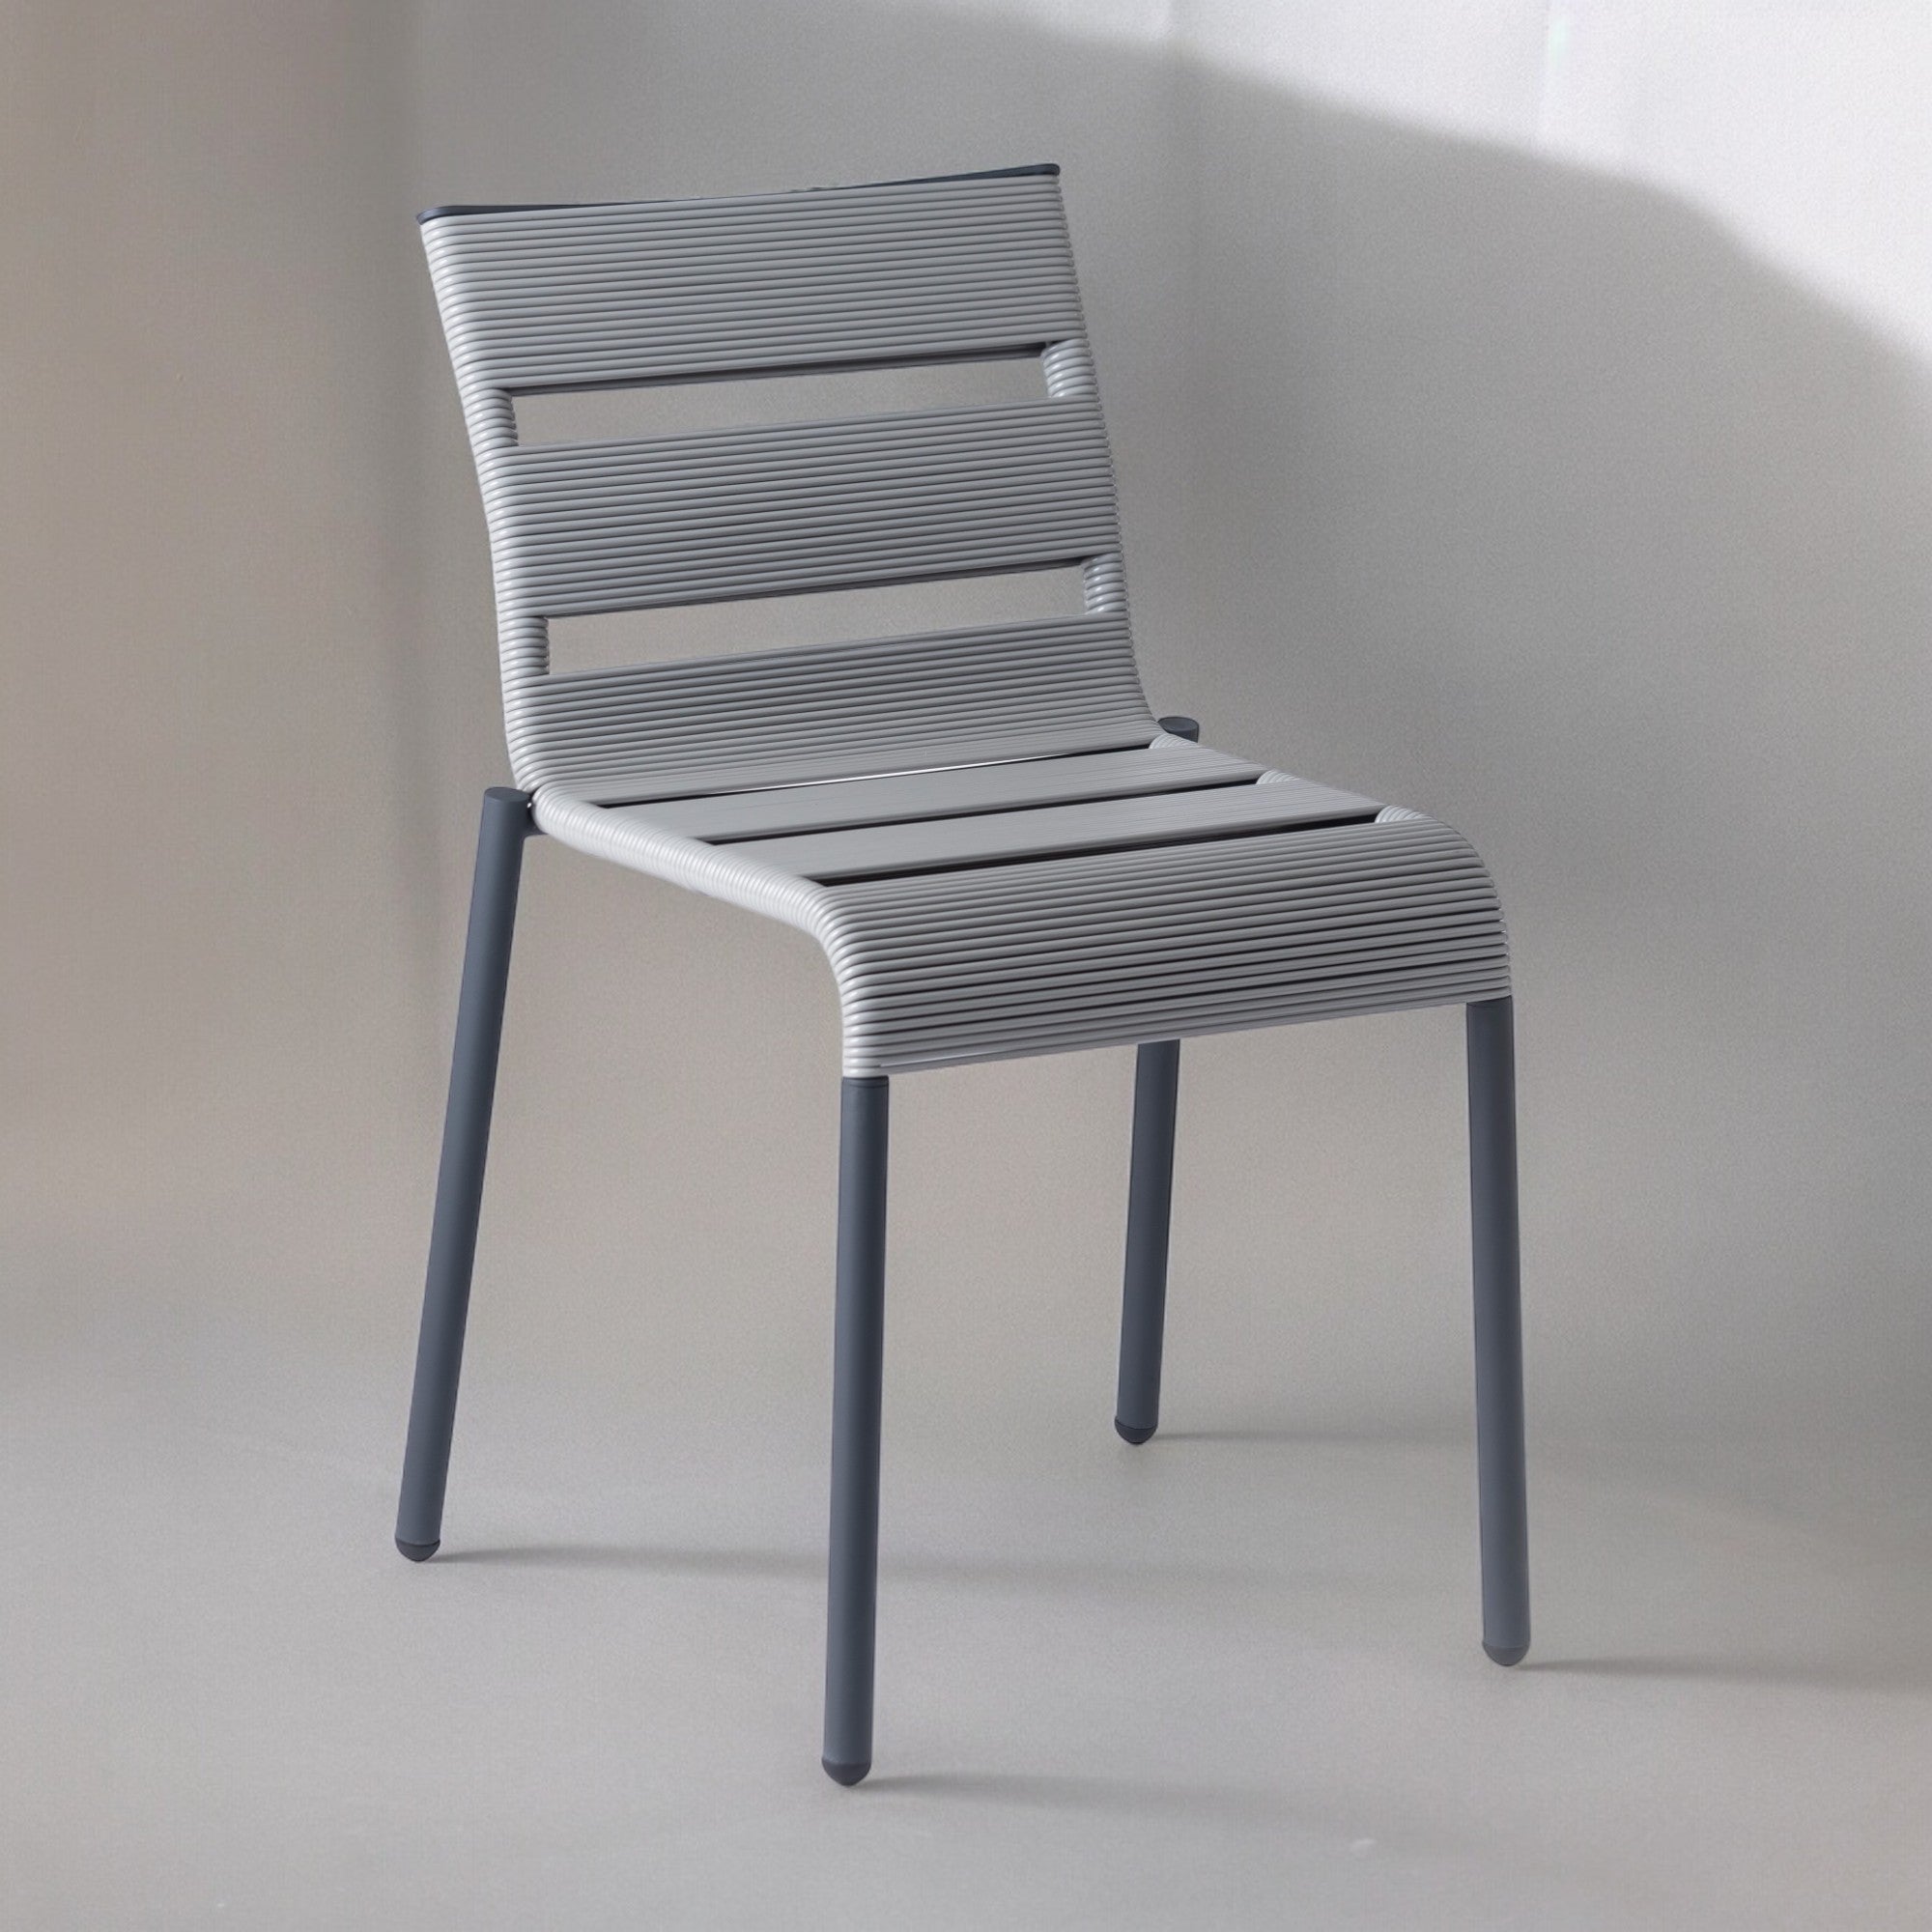 Barcelonette Dining Chair by MEXA